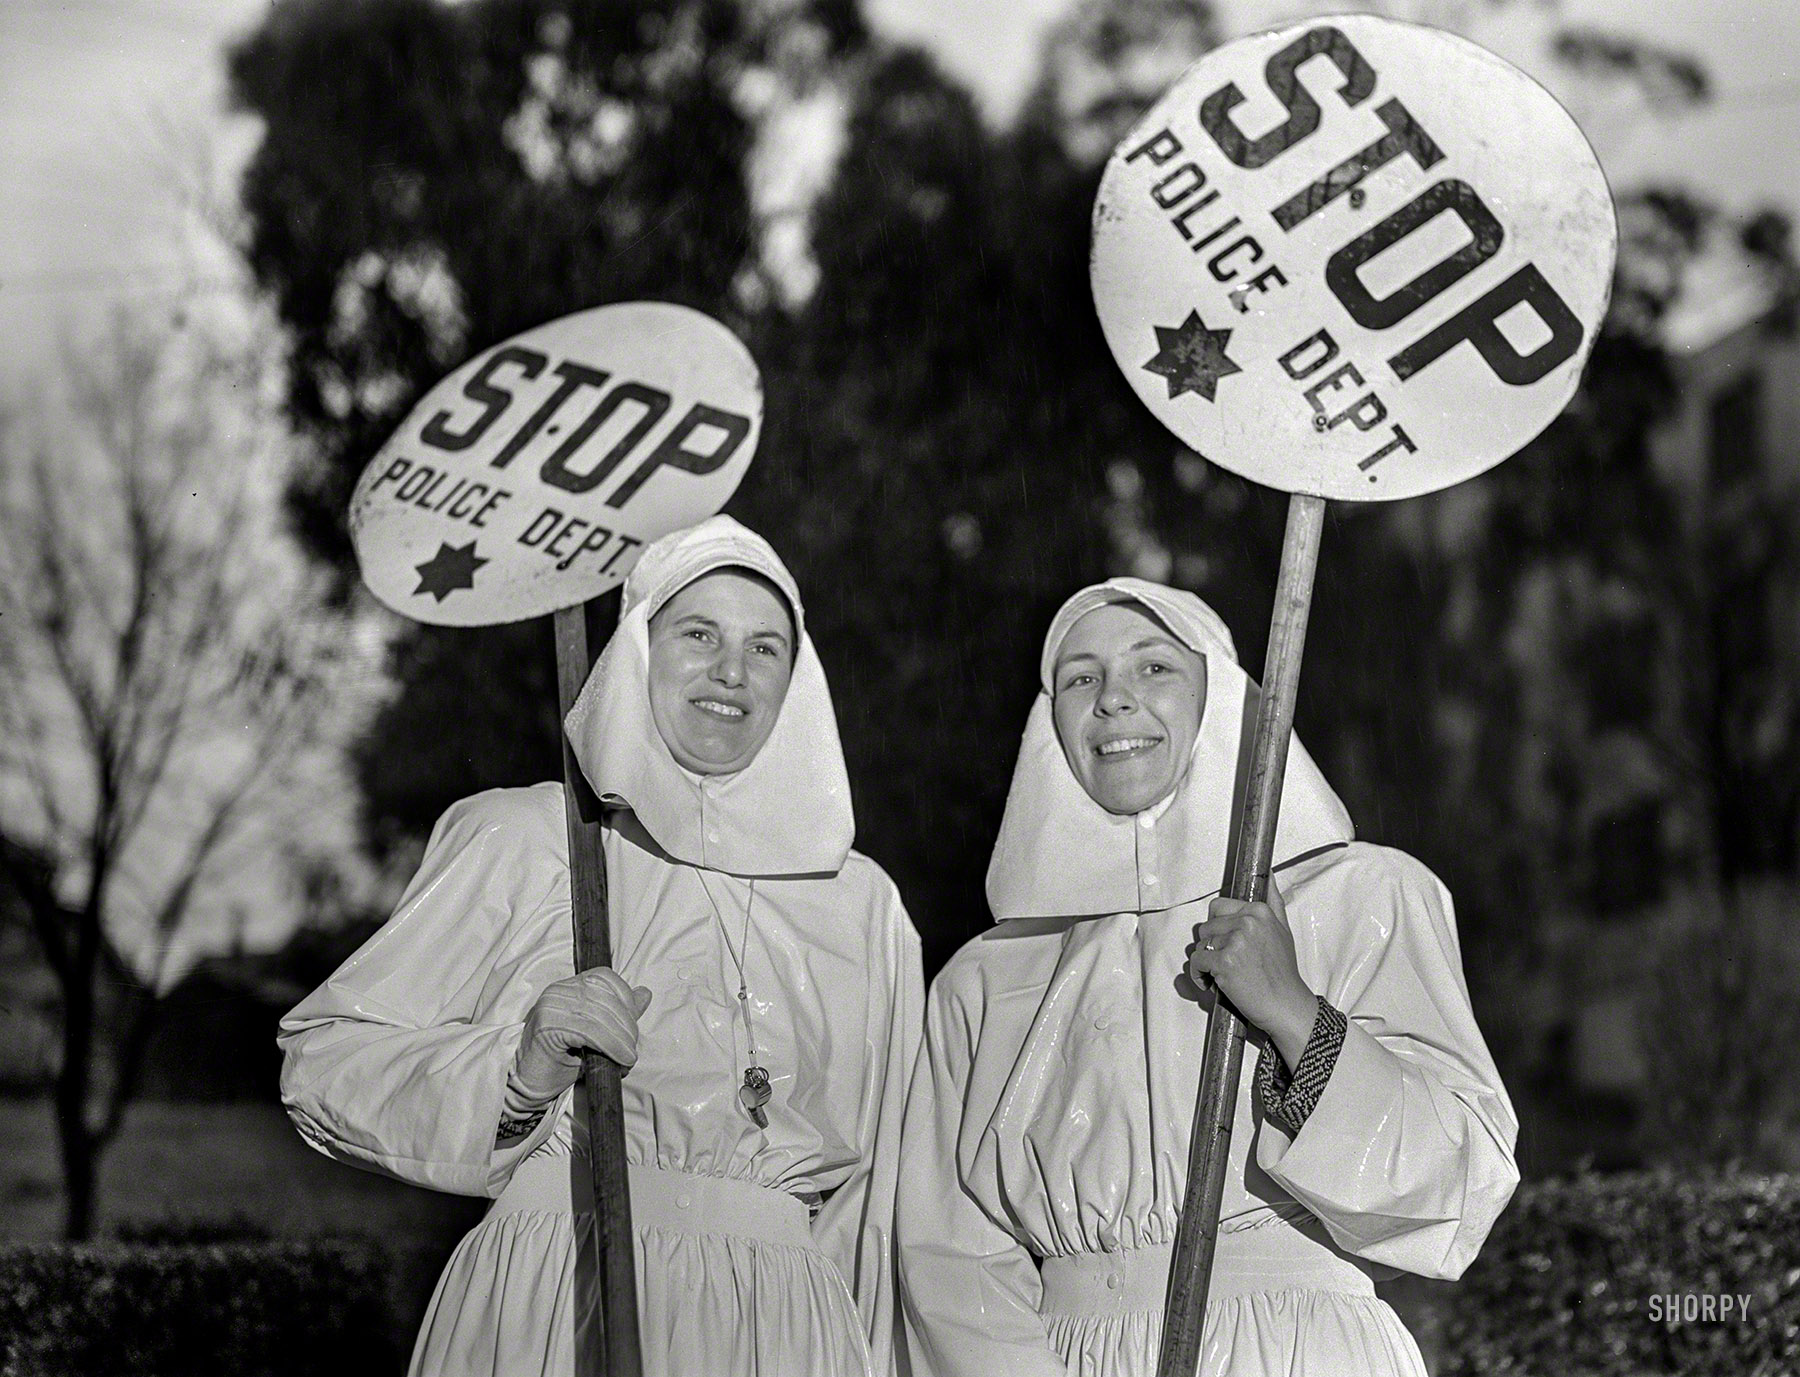 February 1943. "Women in essential services. Mrs. E.K. Sabel and Mrs. J.R. Harris, members of the Women's Safety Traffic Reserve in Oakland, California, are among the many mothers who are keeping the city's accident rate low by guarding crossings during school hours." Photo by Ann Rosener for the Office of War Information. View full size.